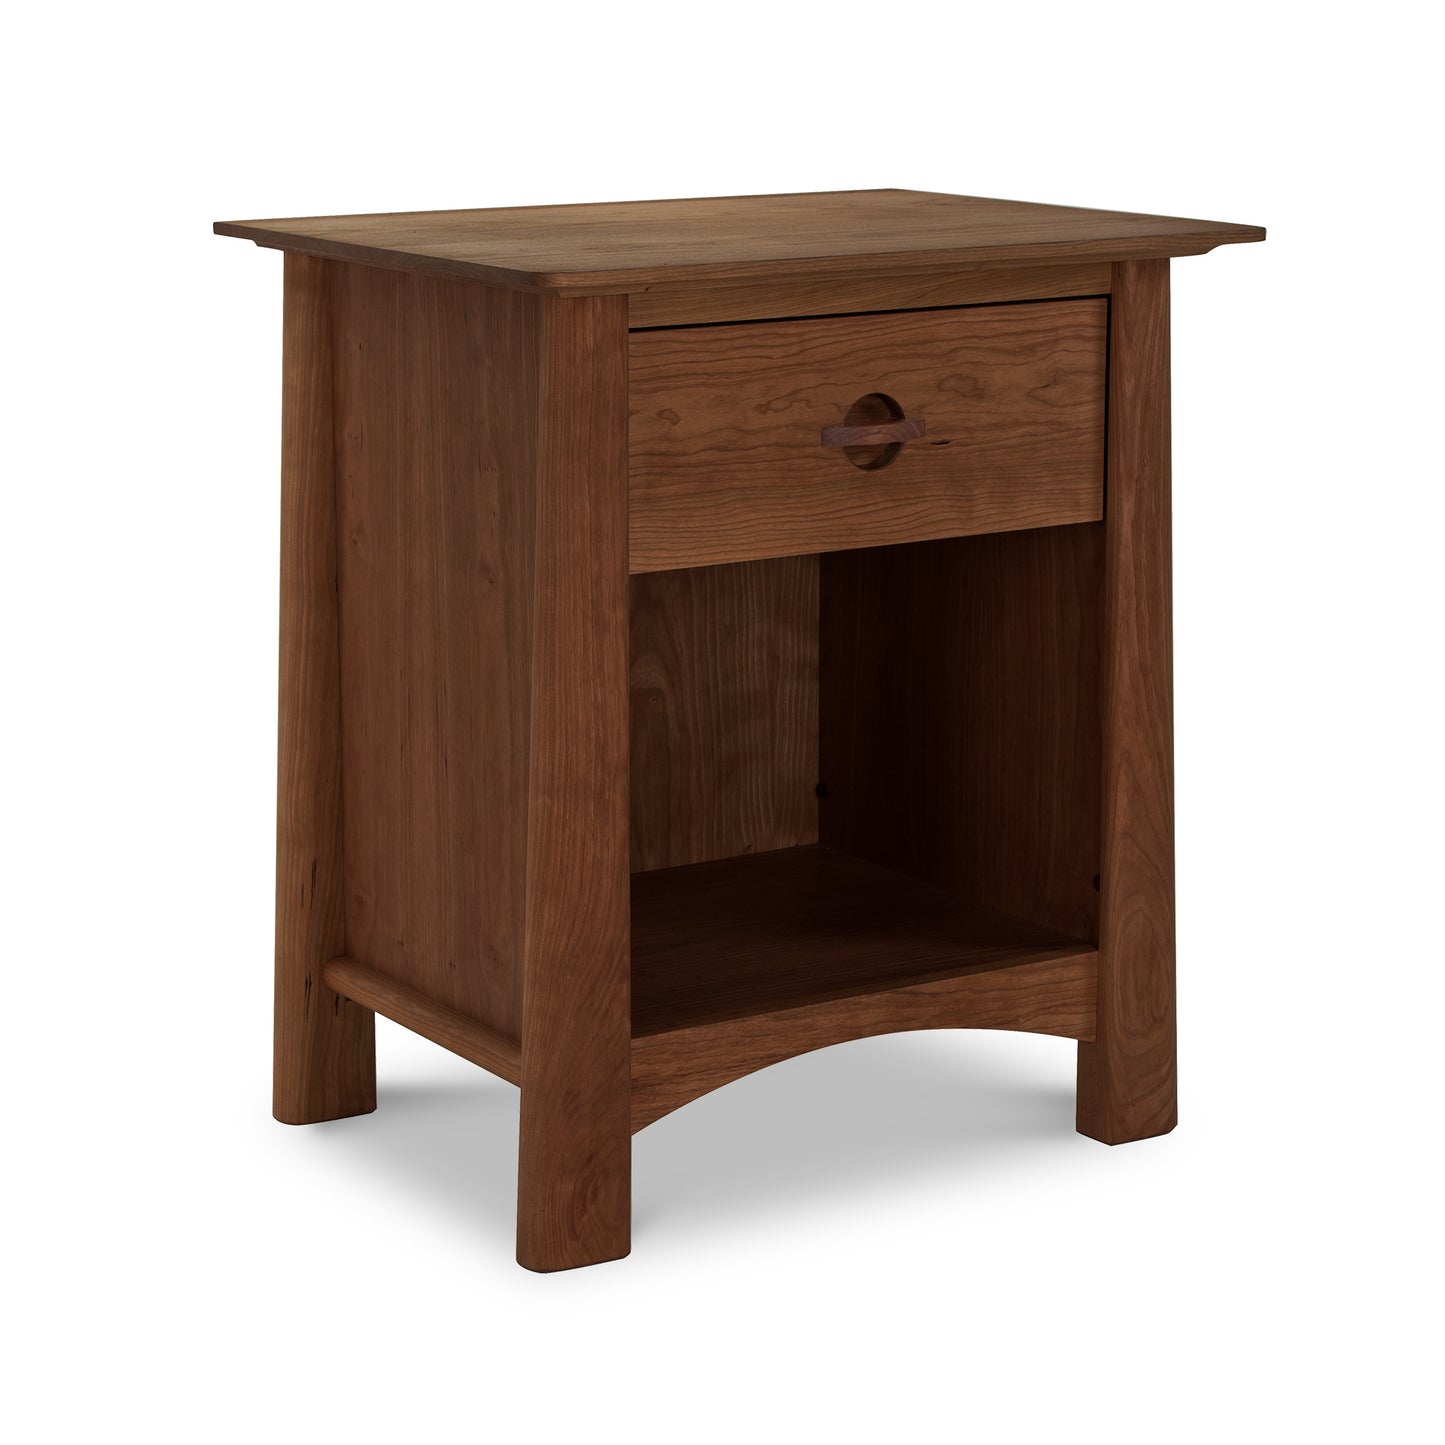 A Cherry Moon 1-Drawer Enclosed Shelf Nightstand by Maple Corner Woodworks, crafted from sustainably harvested hardwoods and featuring a simple knob on the drawer, isolated on a white background.